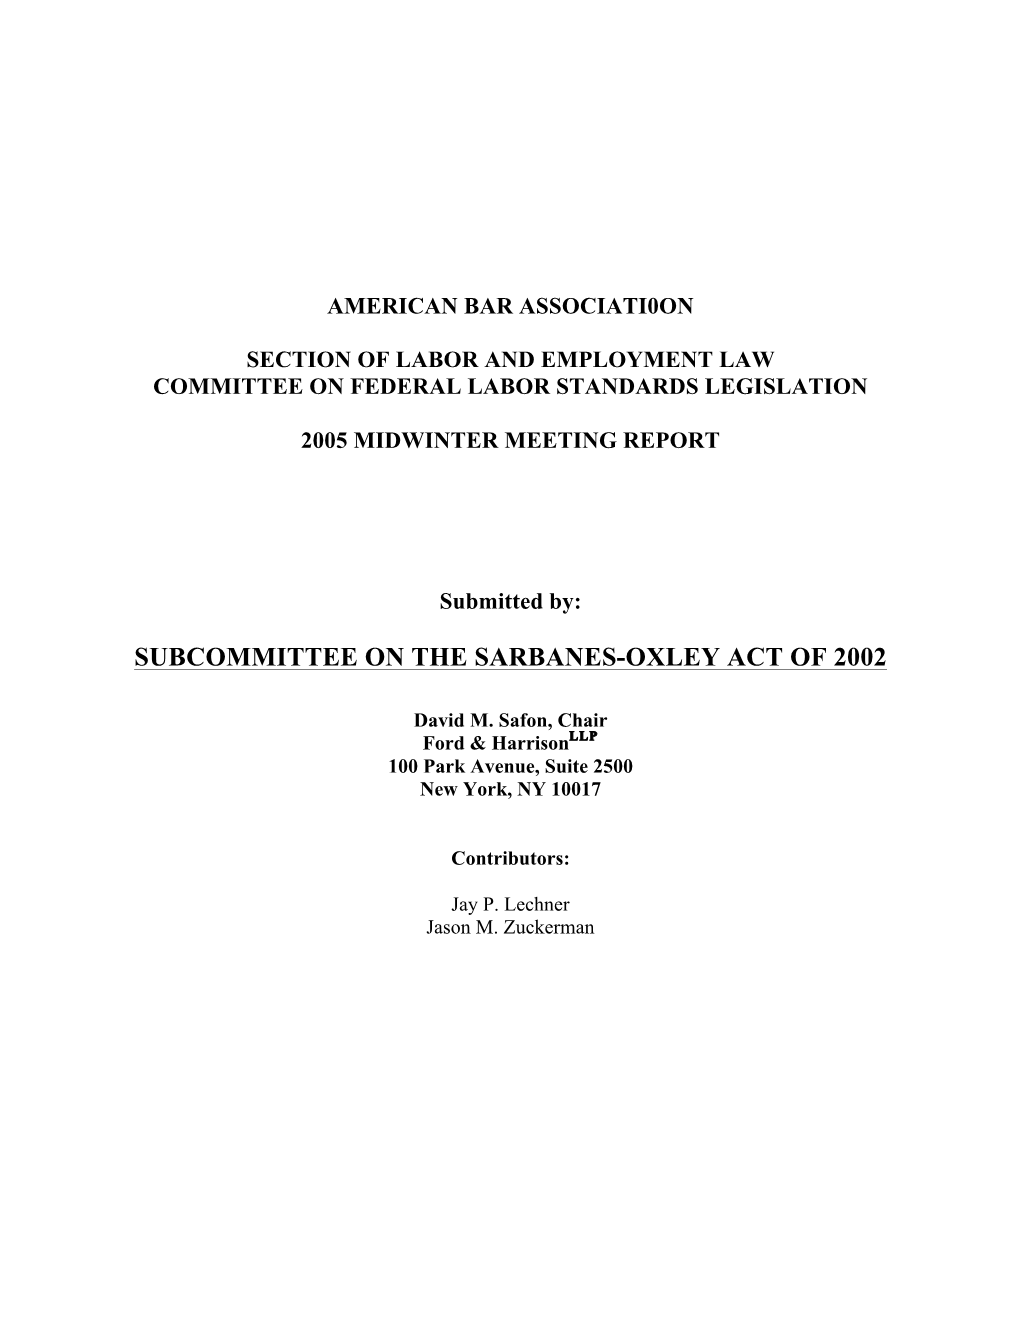 Subcommittee on the Sarbanes-Oxley Act of 2002